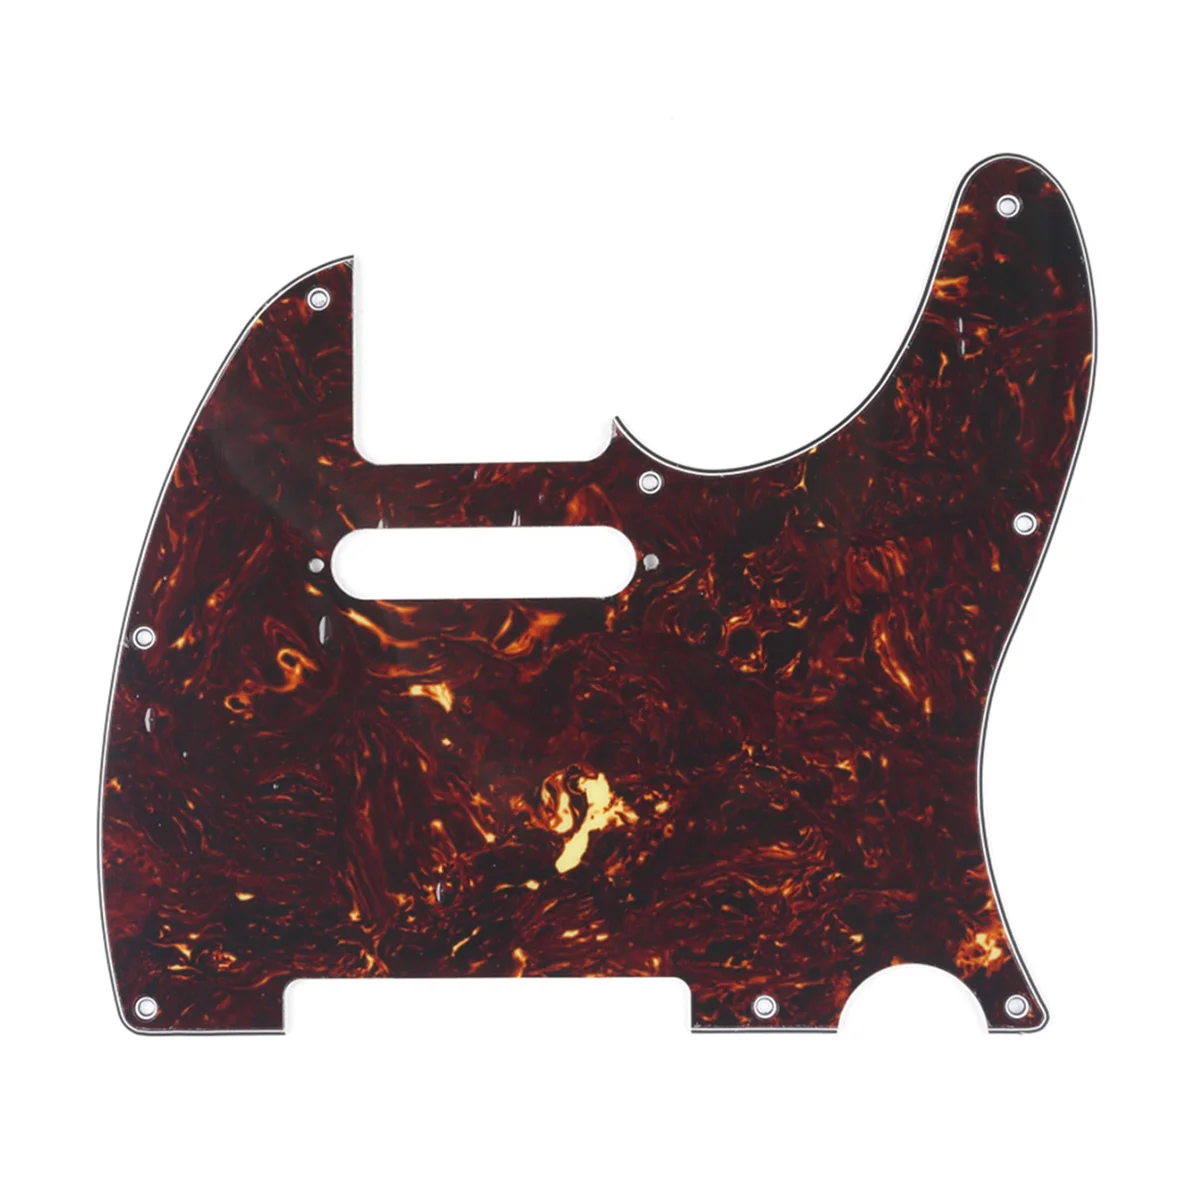 

Musiclily 8 Hole Tele Guitar Pickguard for USA/Mexican Made Fender Standard Telecaster Modern Style, 4Ply Tortoise Shell